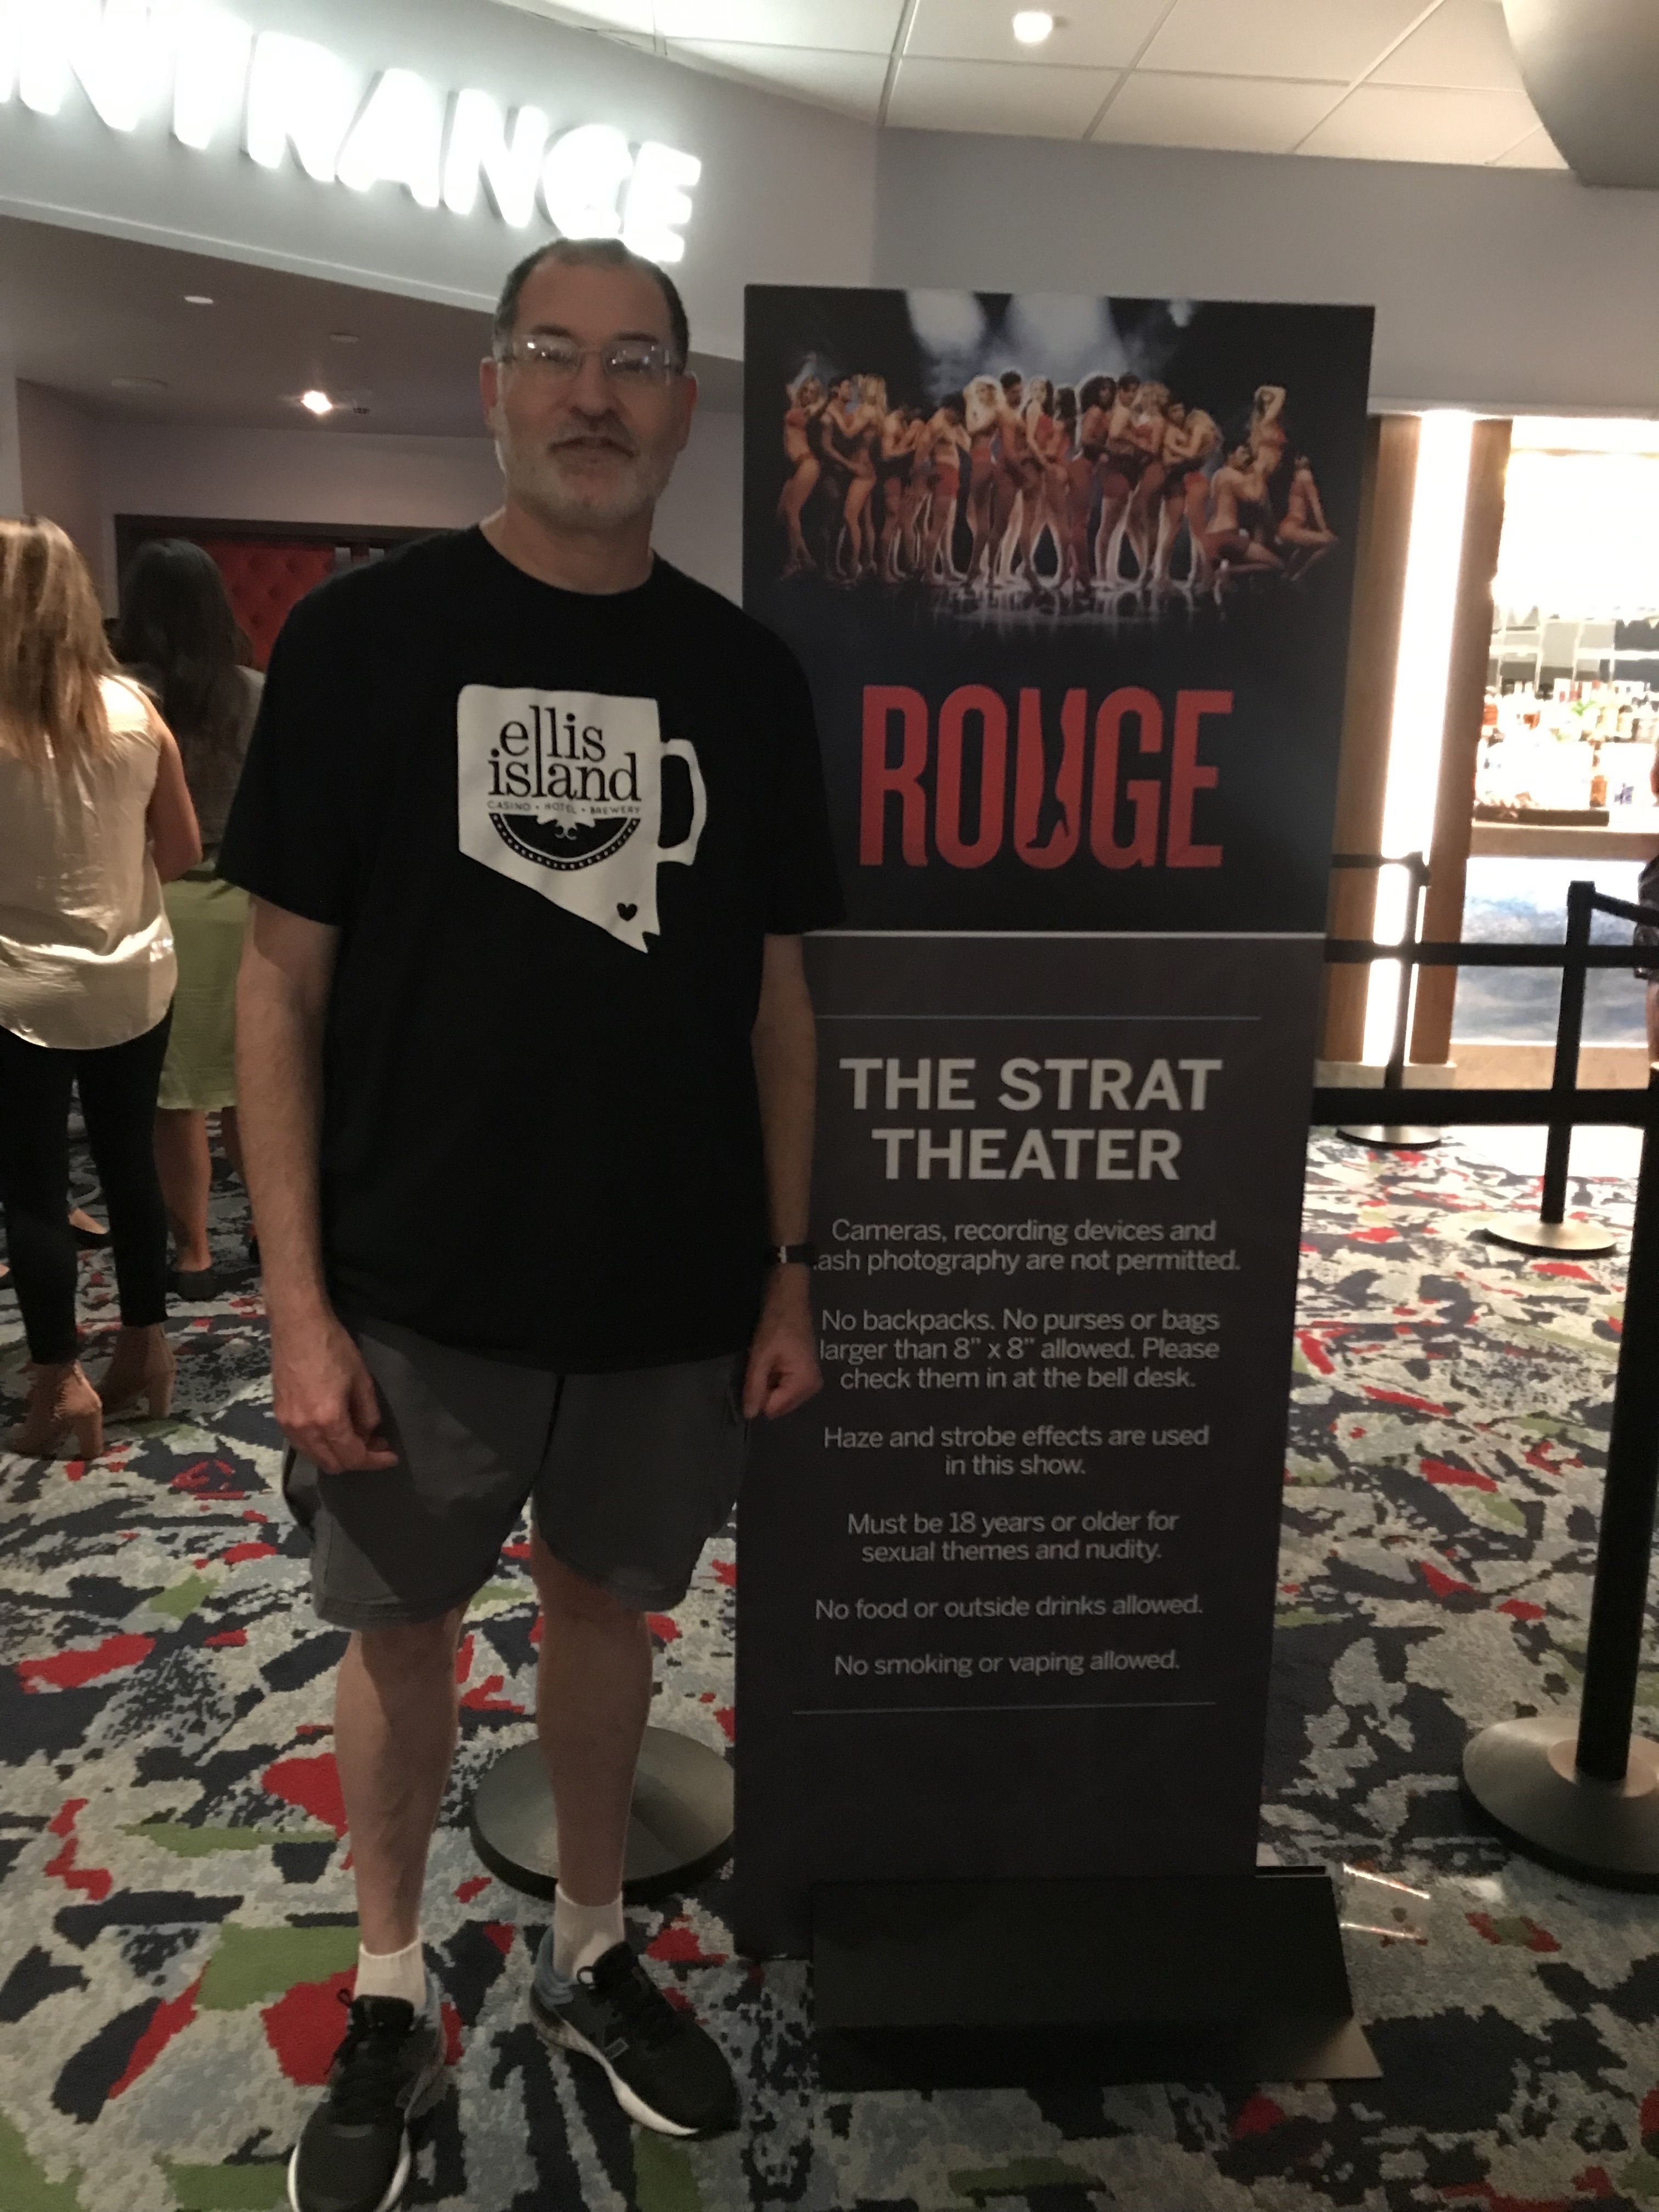 Rouge - The Sexiest Show in Vegas at the Strat Hotel and Casino